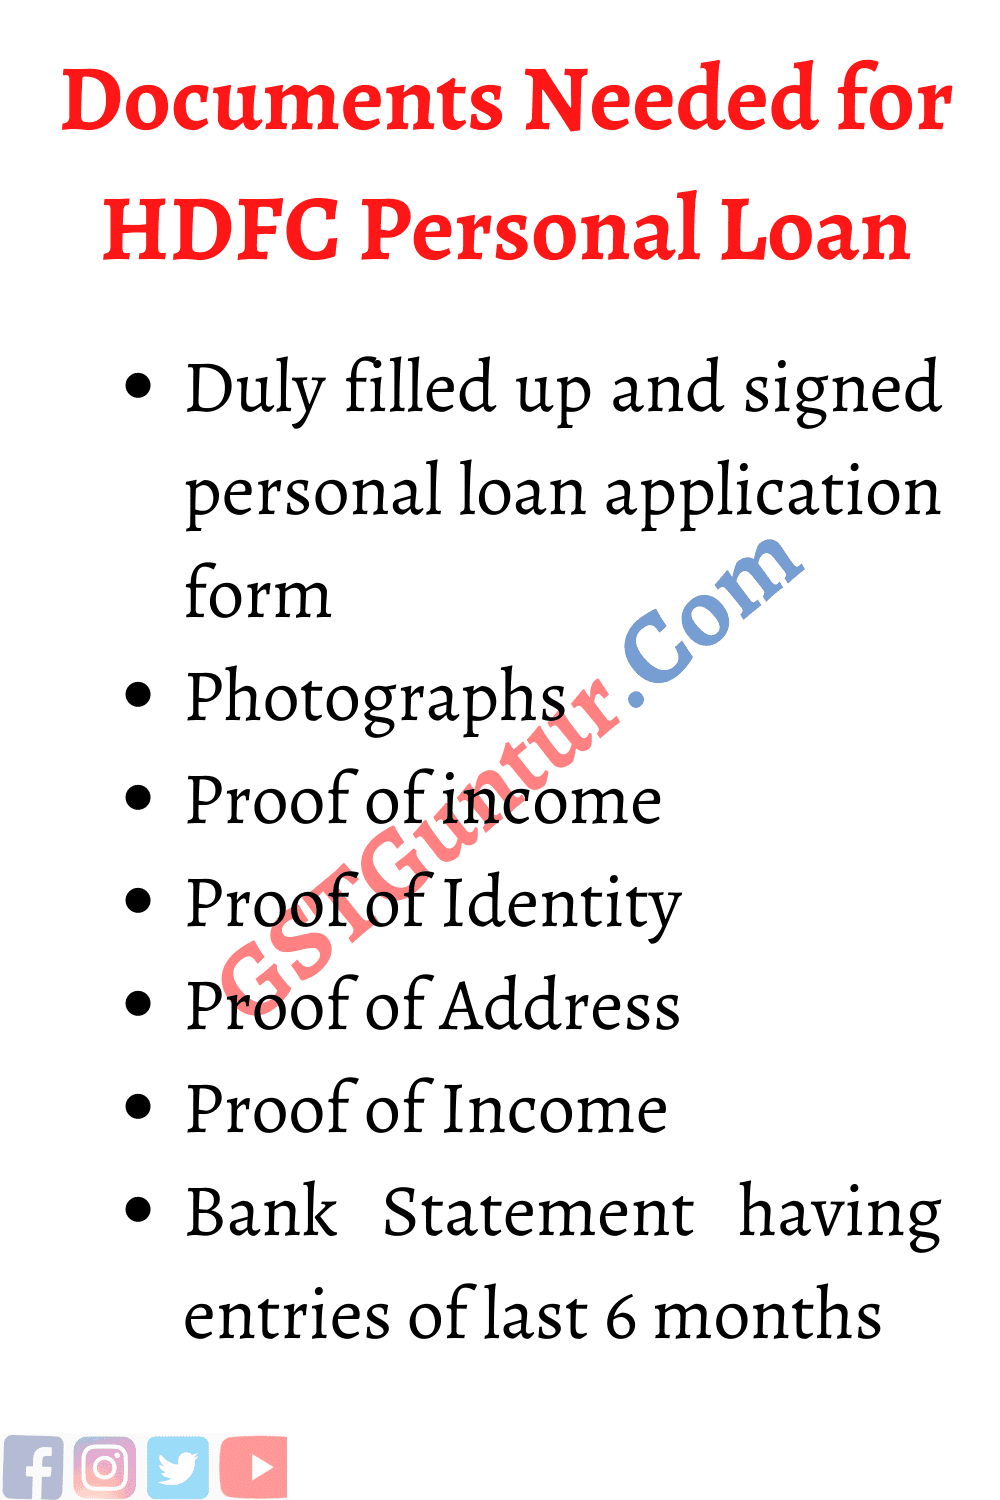 Documents Needed for HDFC Bank Personal Loan